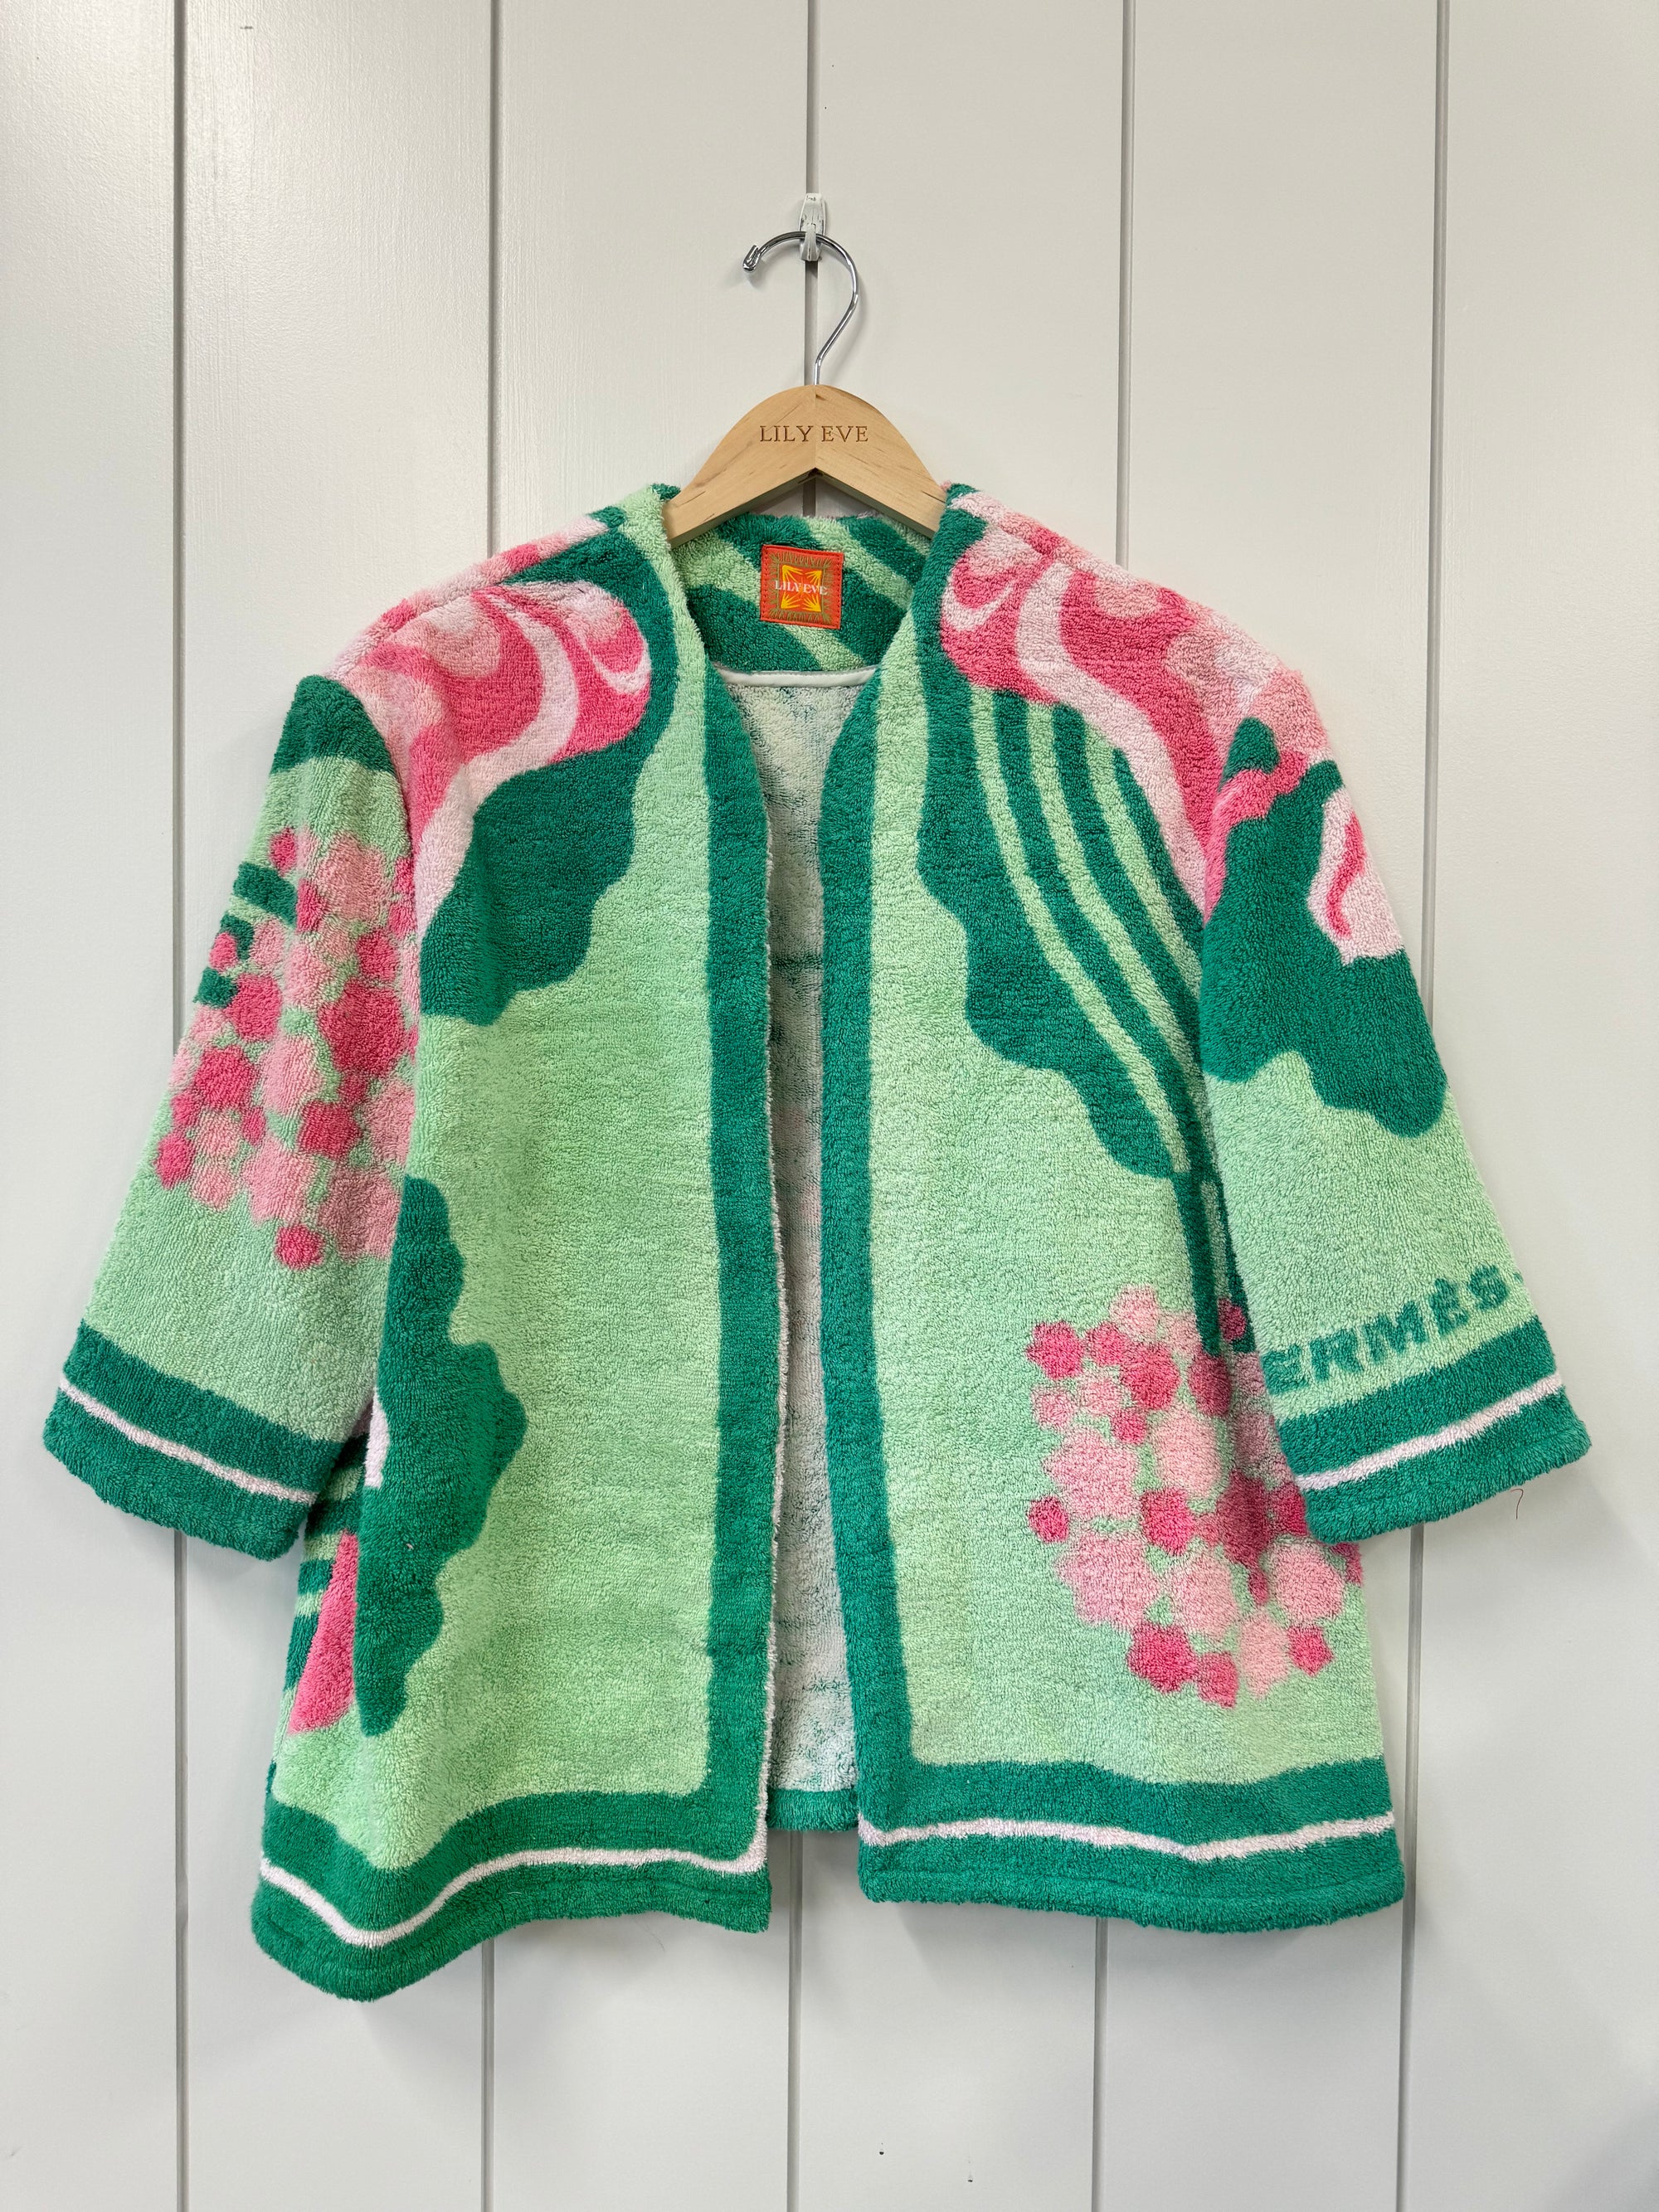 The Green Butterfly Jacket